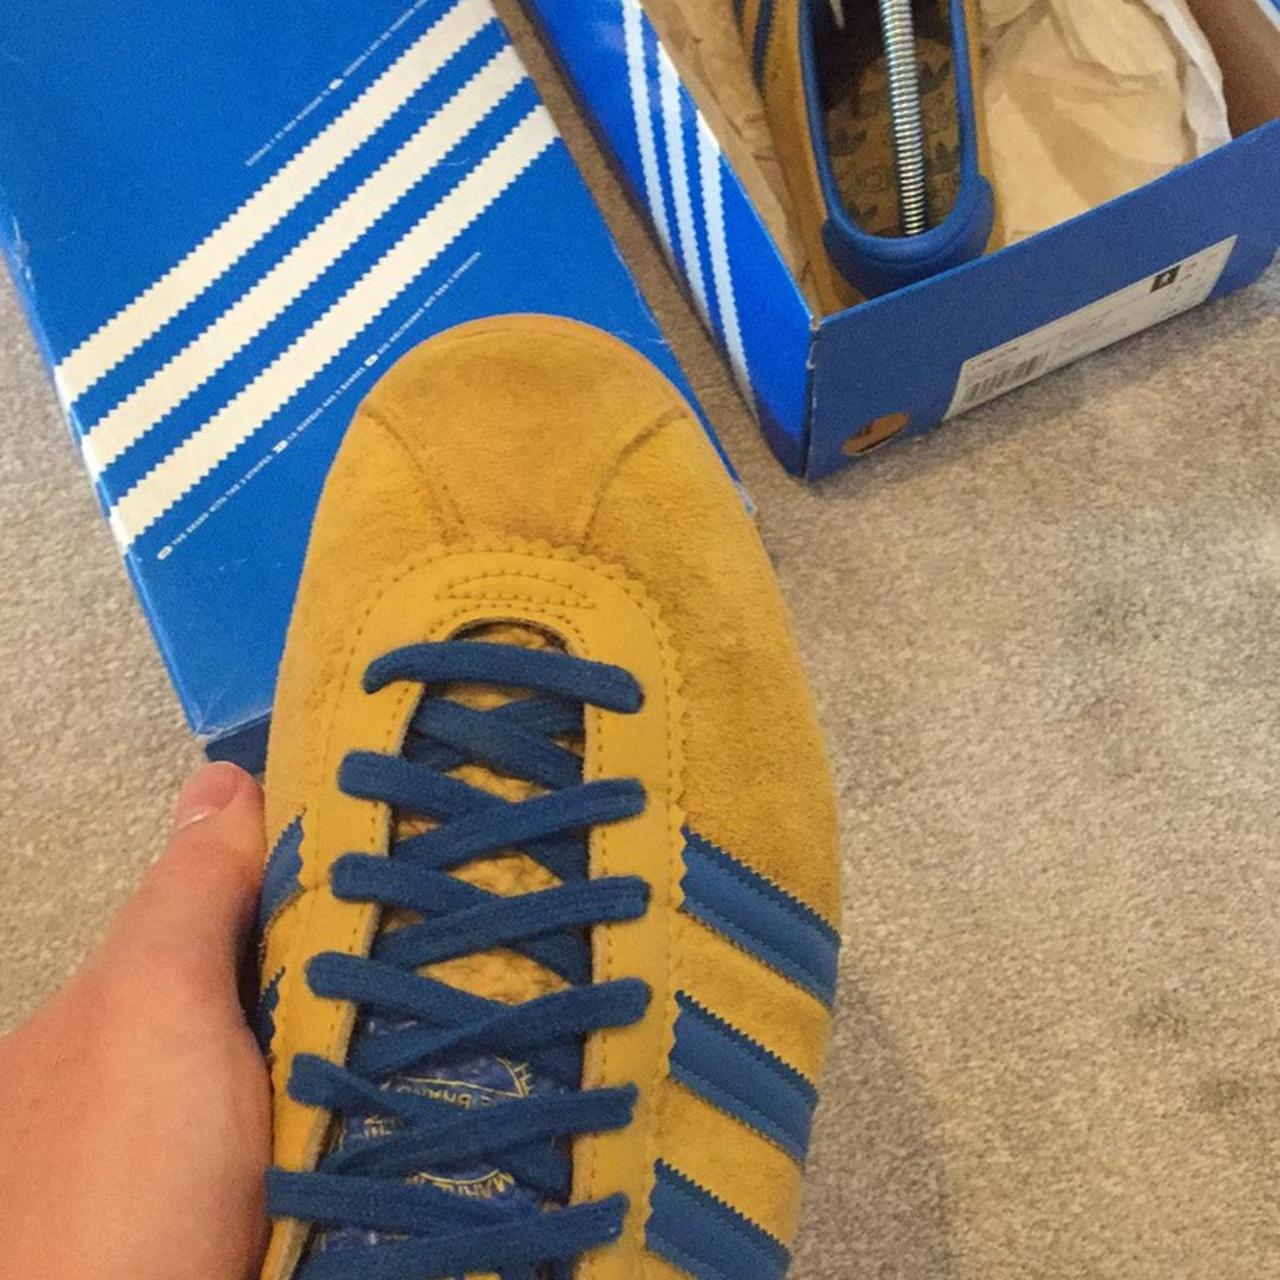 Adidas sunshine londons in a size 9 in great... - Depop